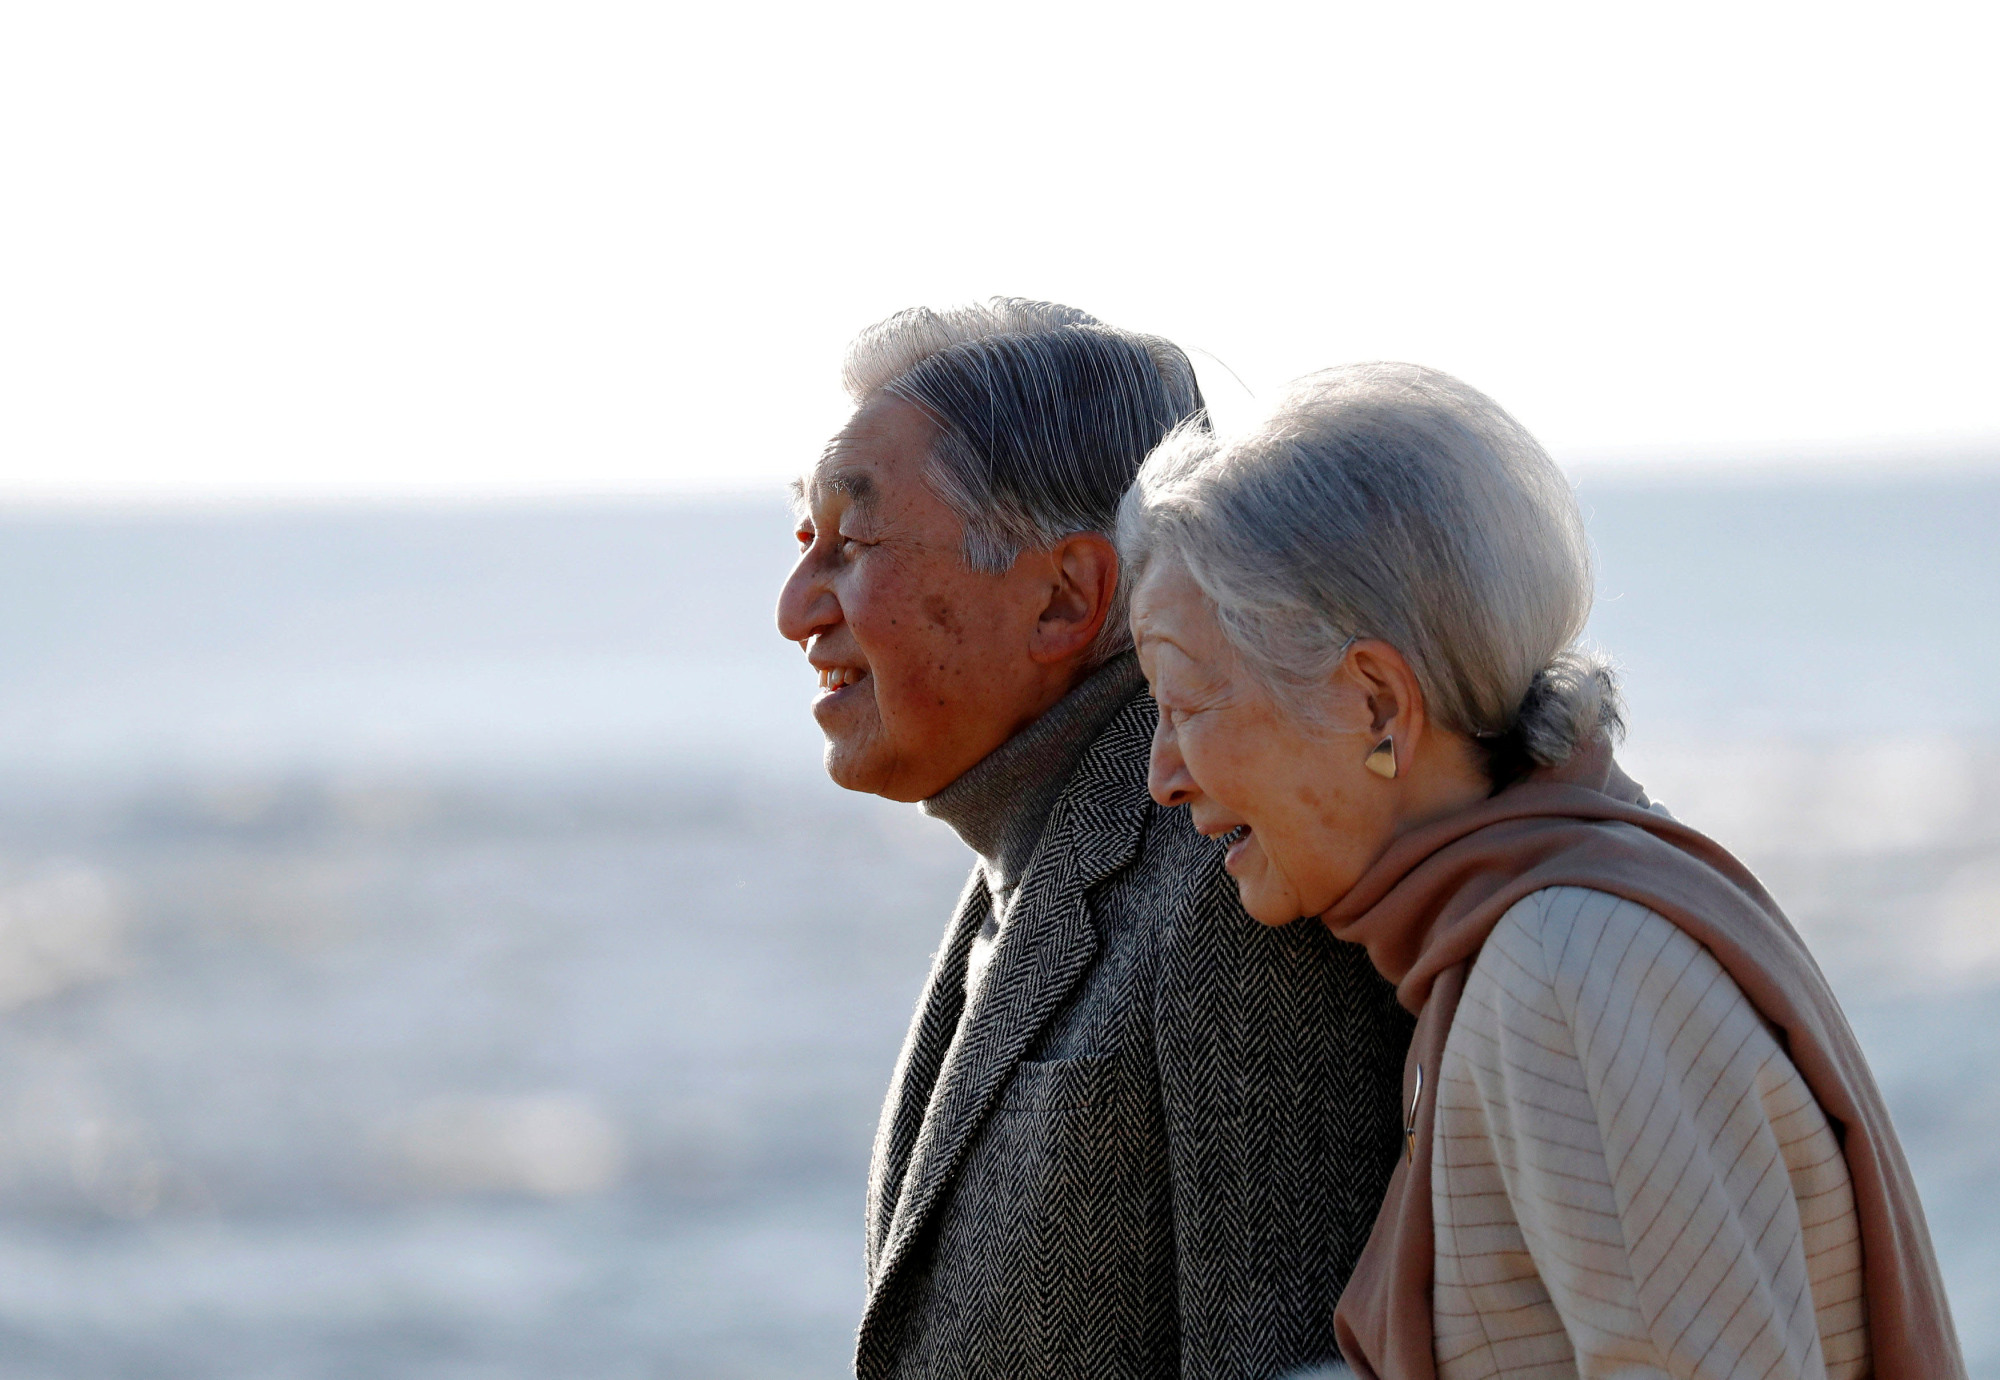 Emperor Akihito and Empress Michiko stroll on a beach near their Imperial villa, where they were staying for the Emperor's recuperation, in Hayama, Kanagawa Prefecture, on Jan. 21. | REUTERS